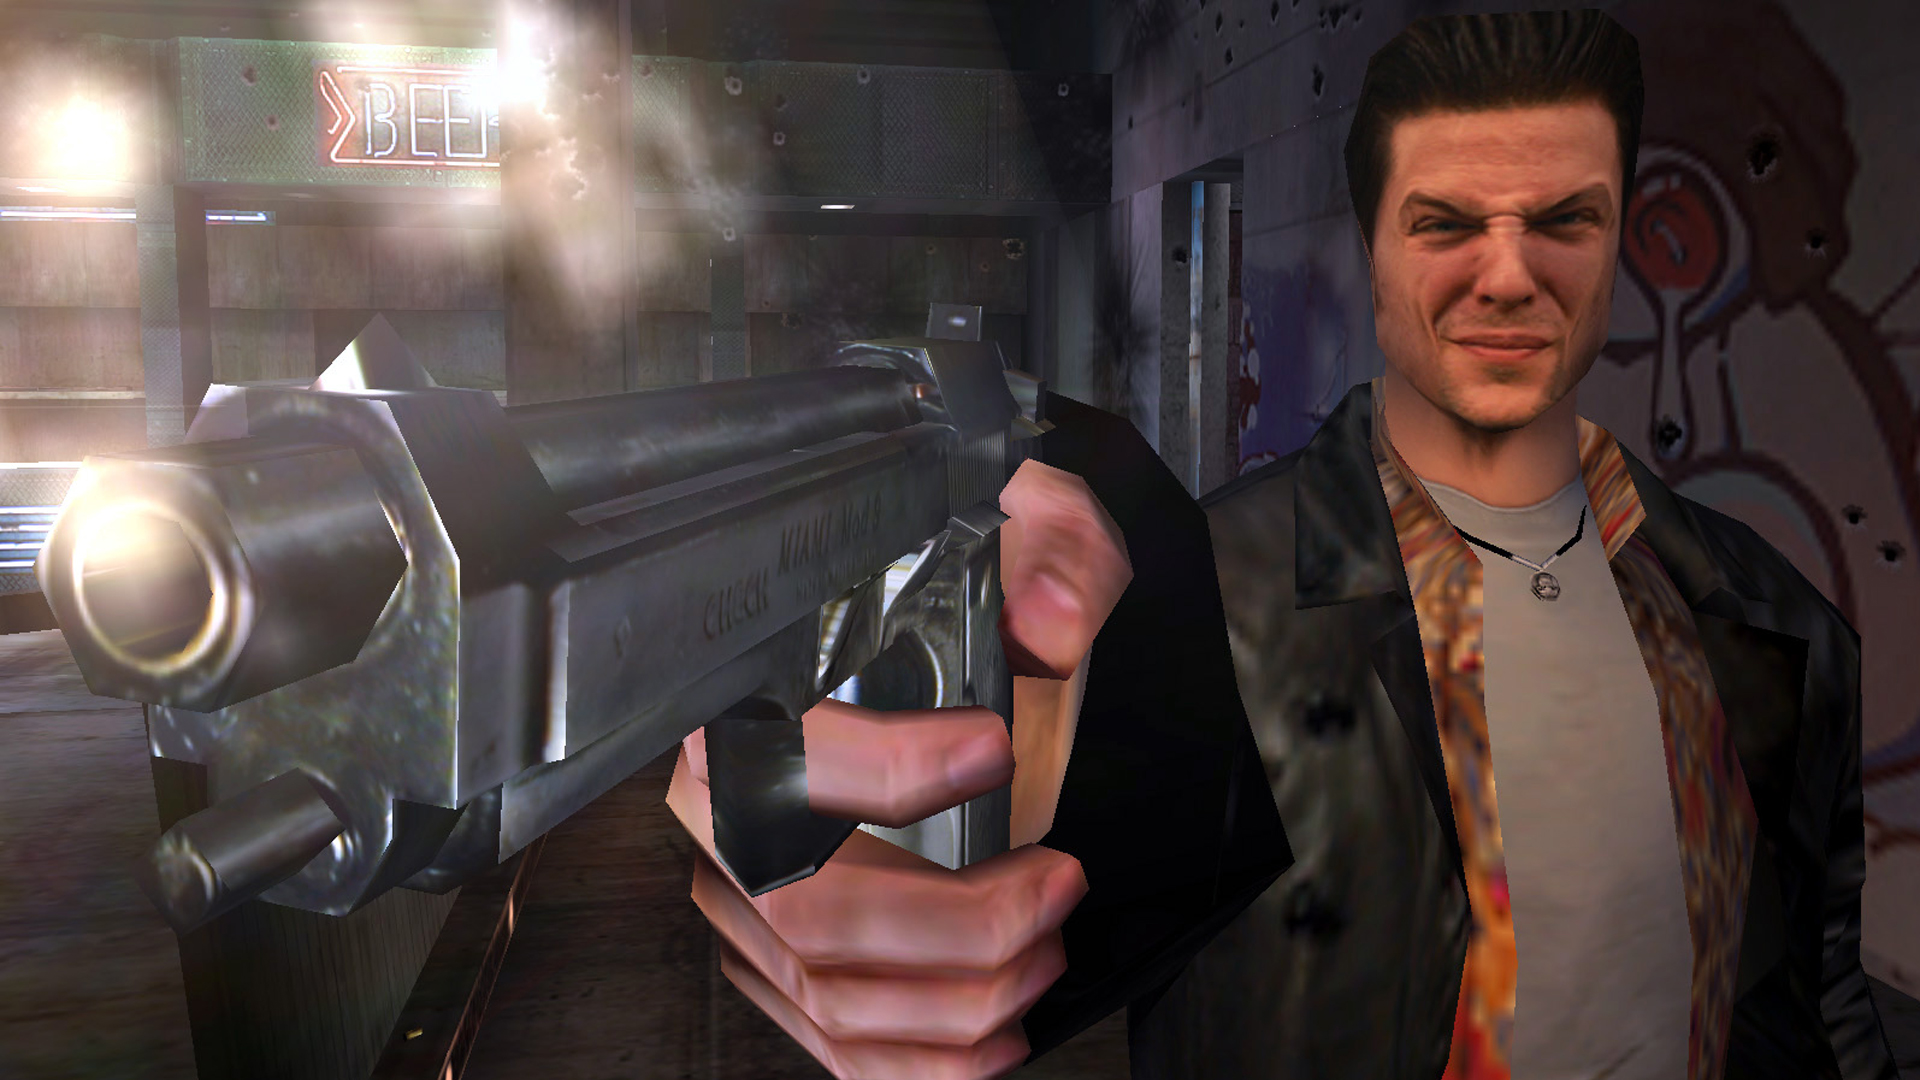 Early Max Payne build out in the wild. - PayneReactor